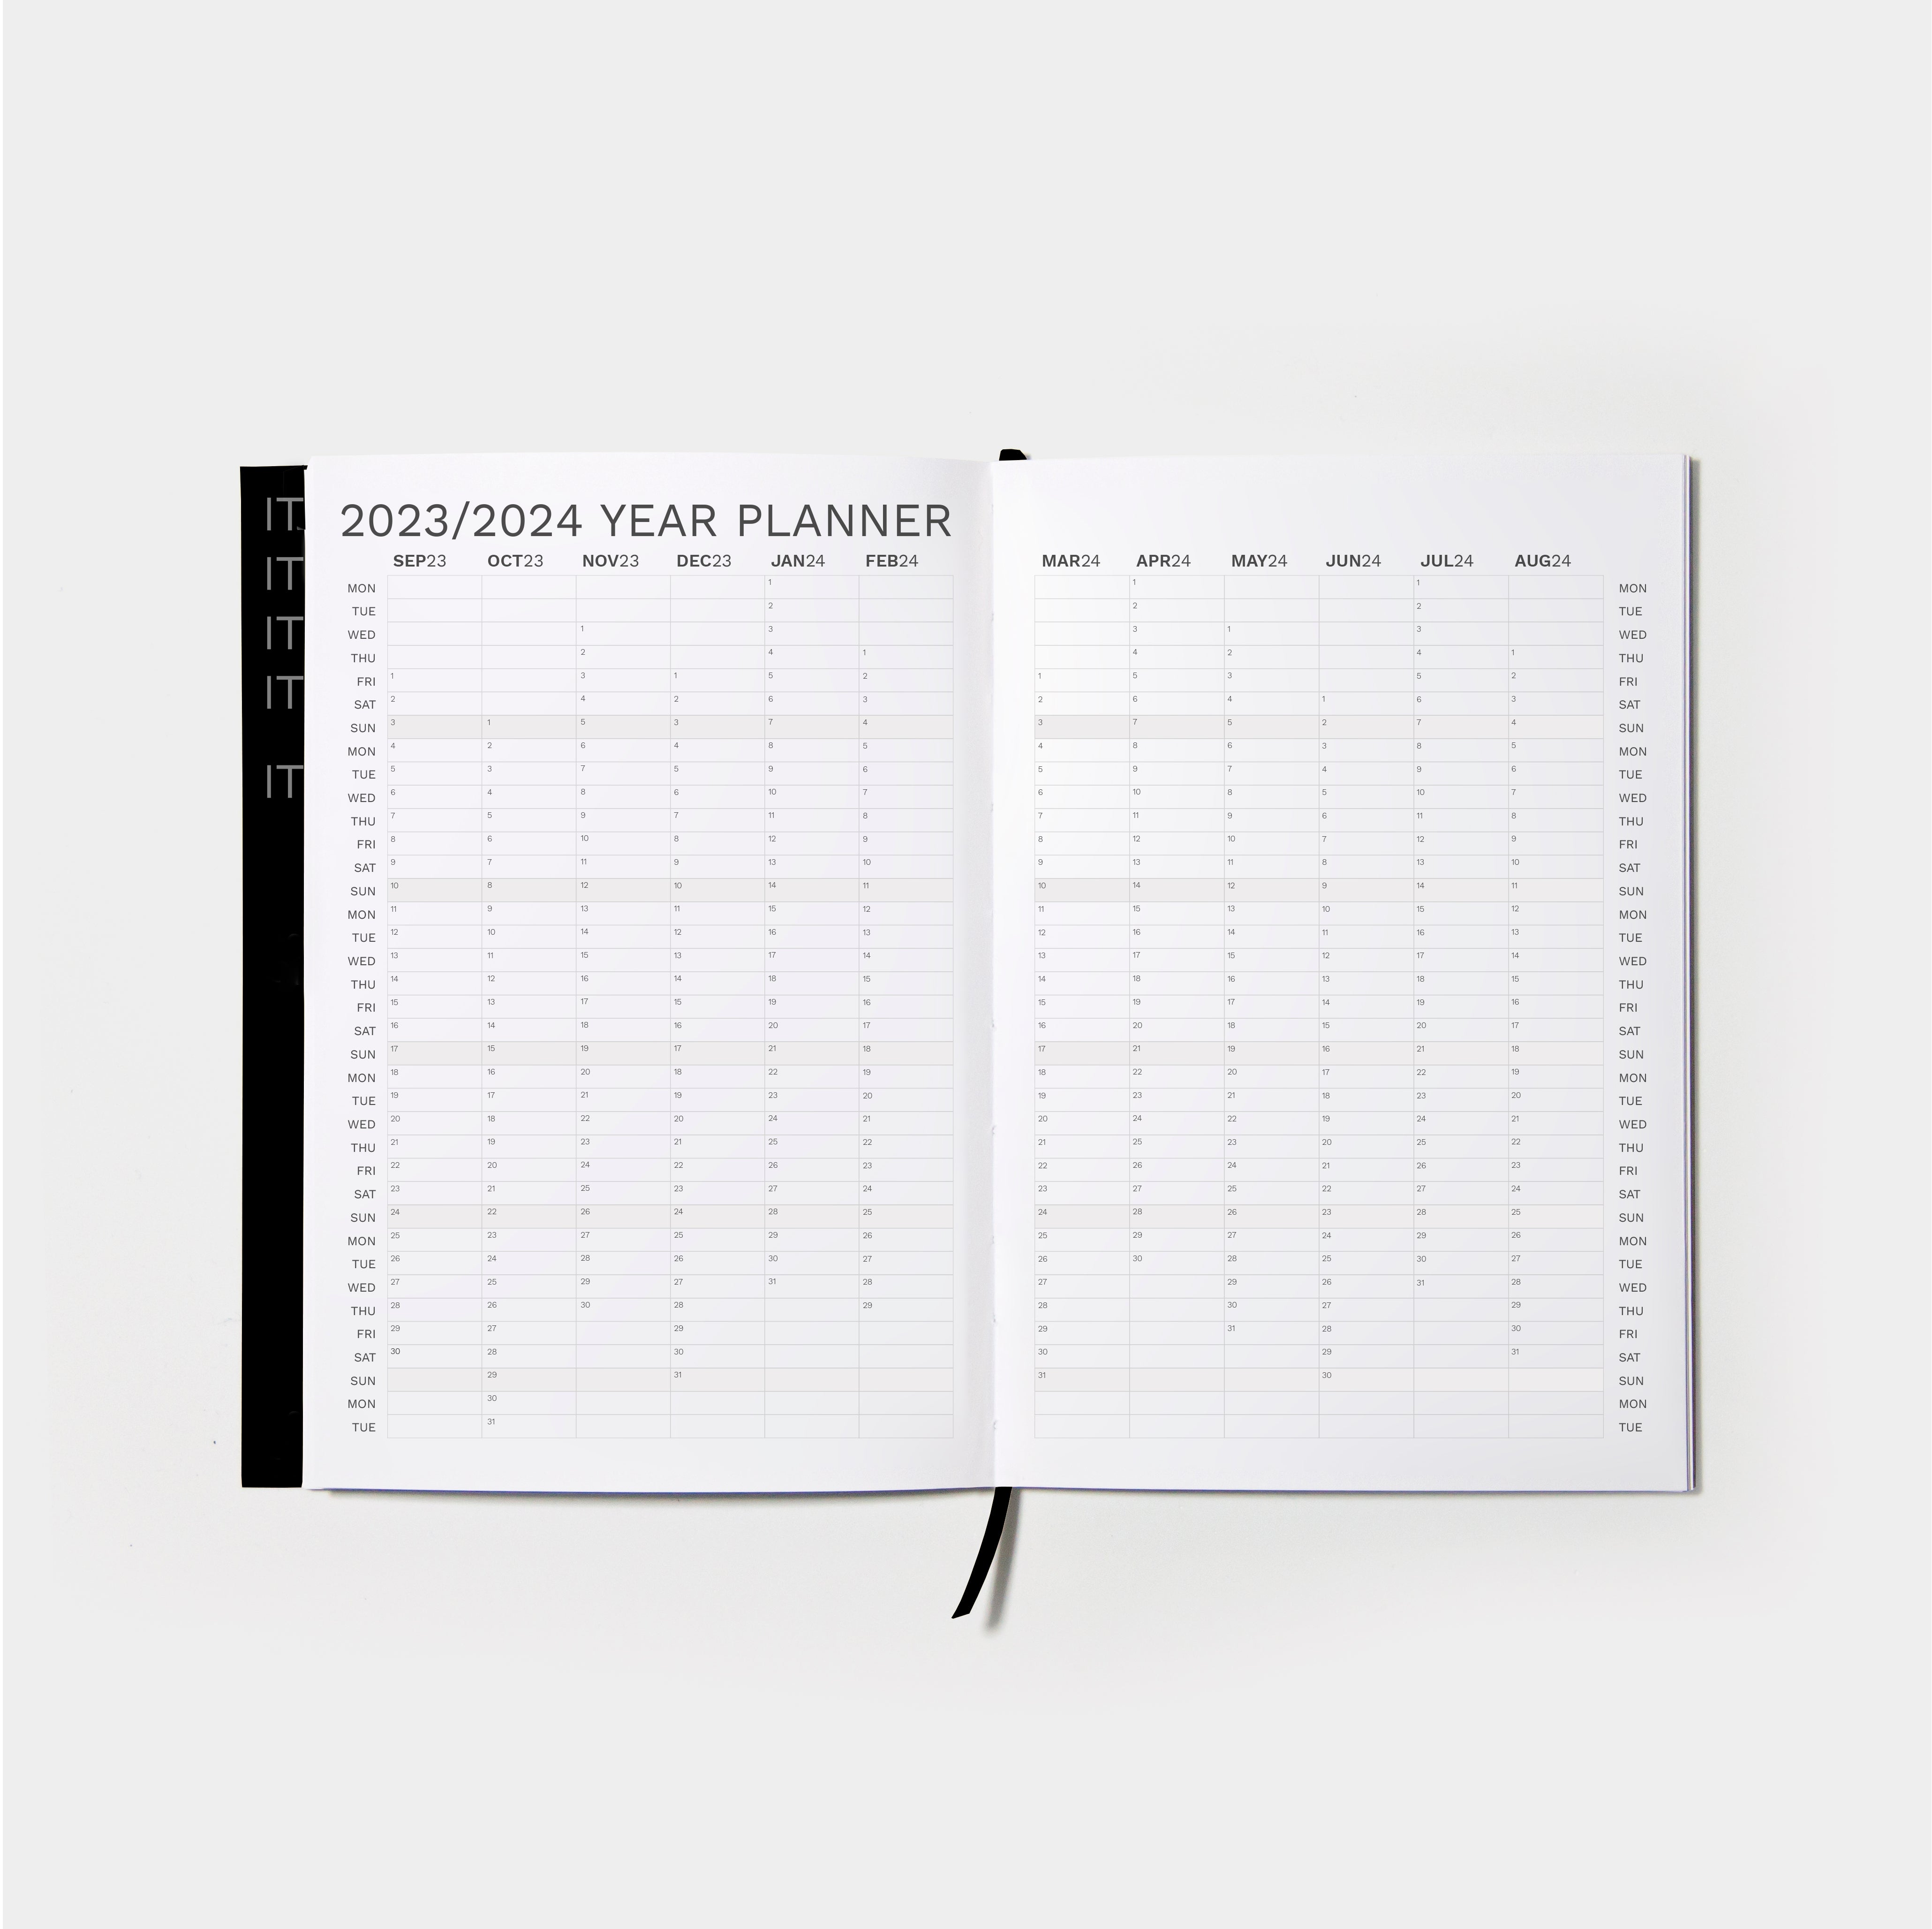 OCTÀGON DESIGN | Open "Sep23 to Aug24" Academic weekly planner. Sep23 to Aug24 year planner.